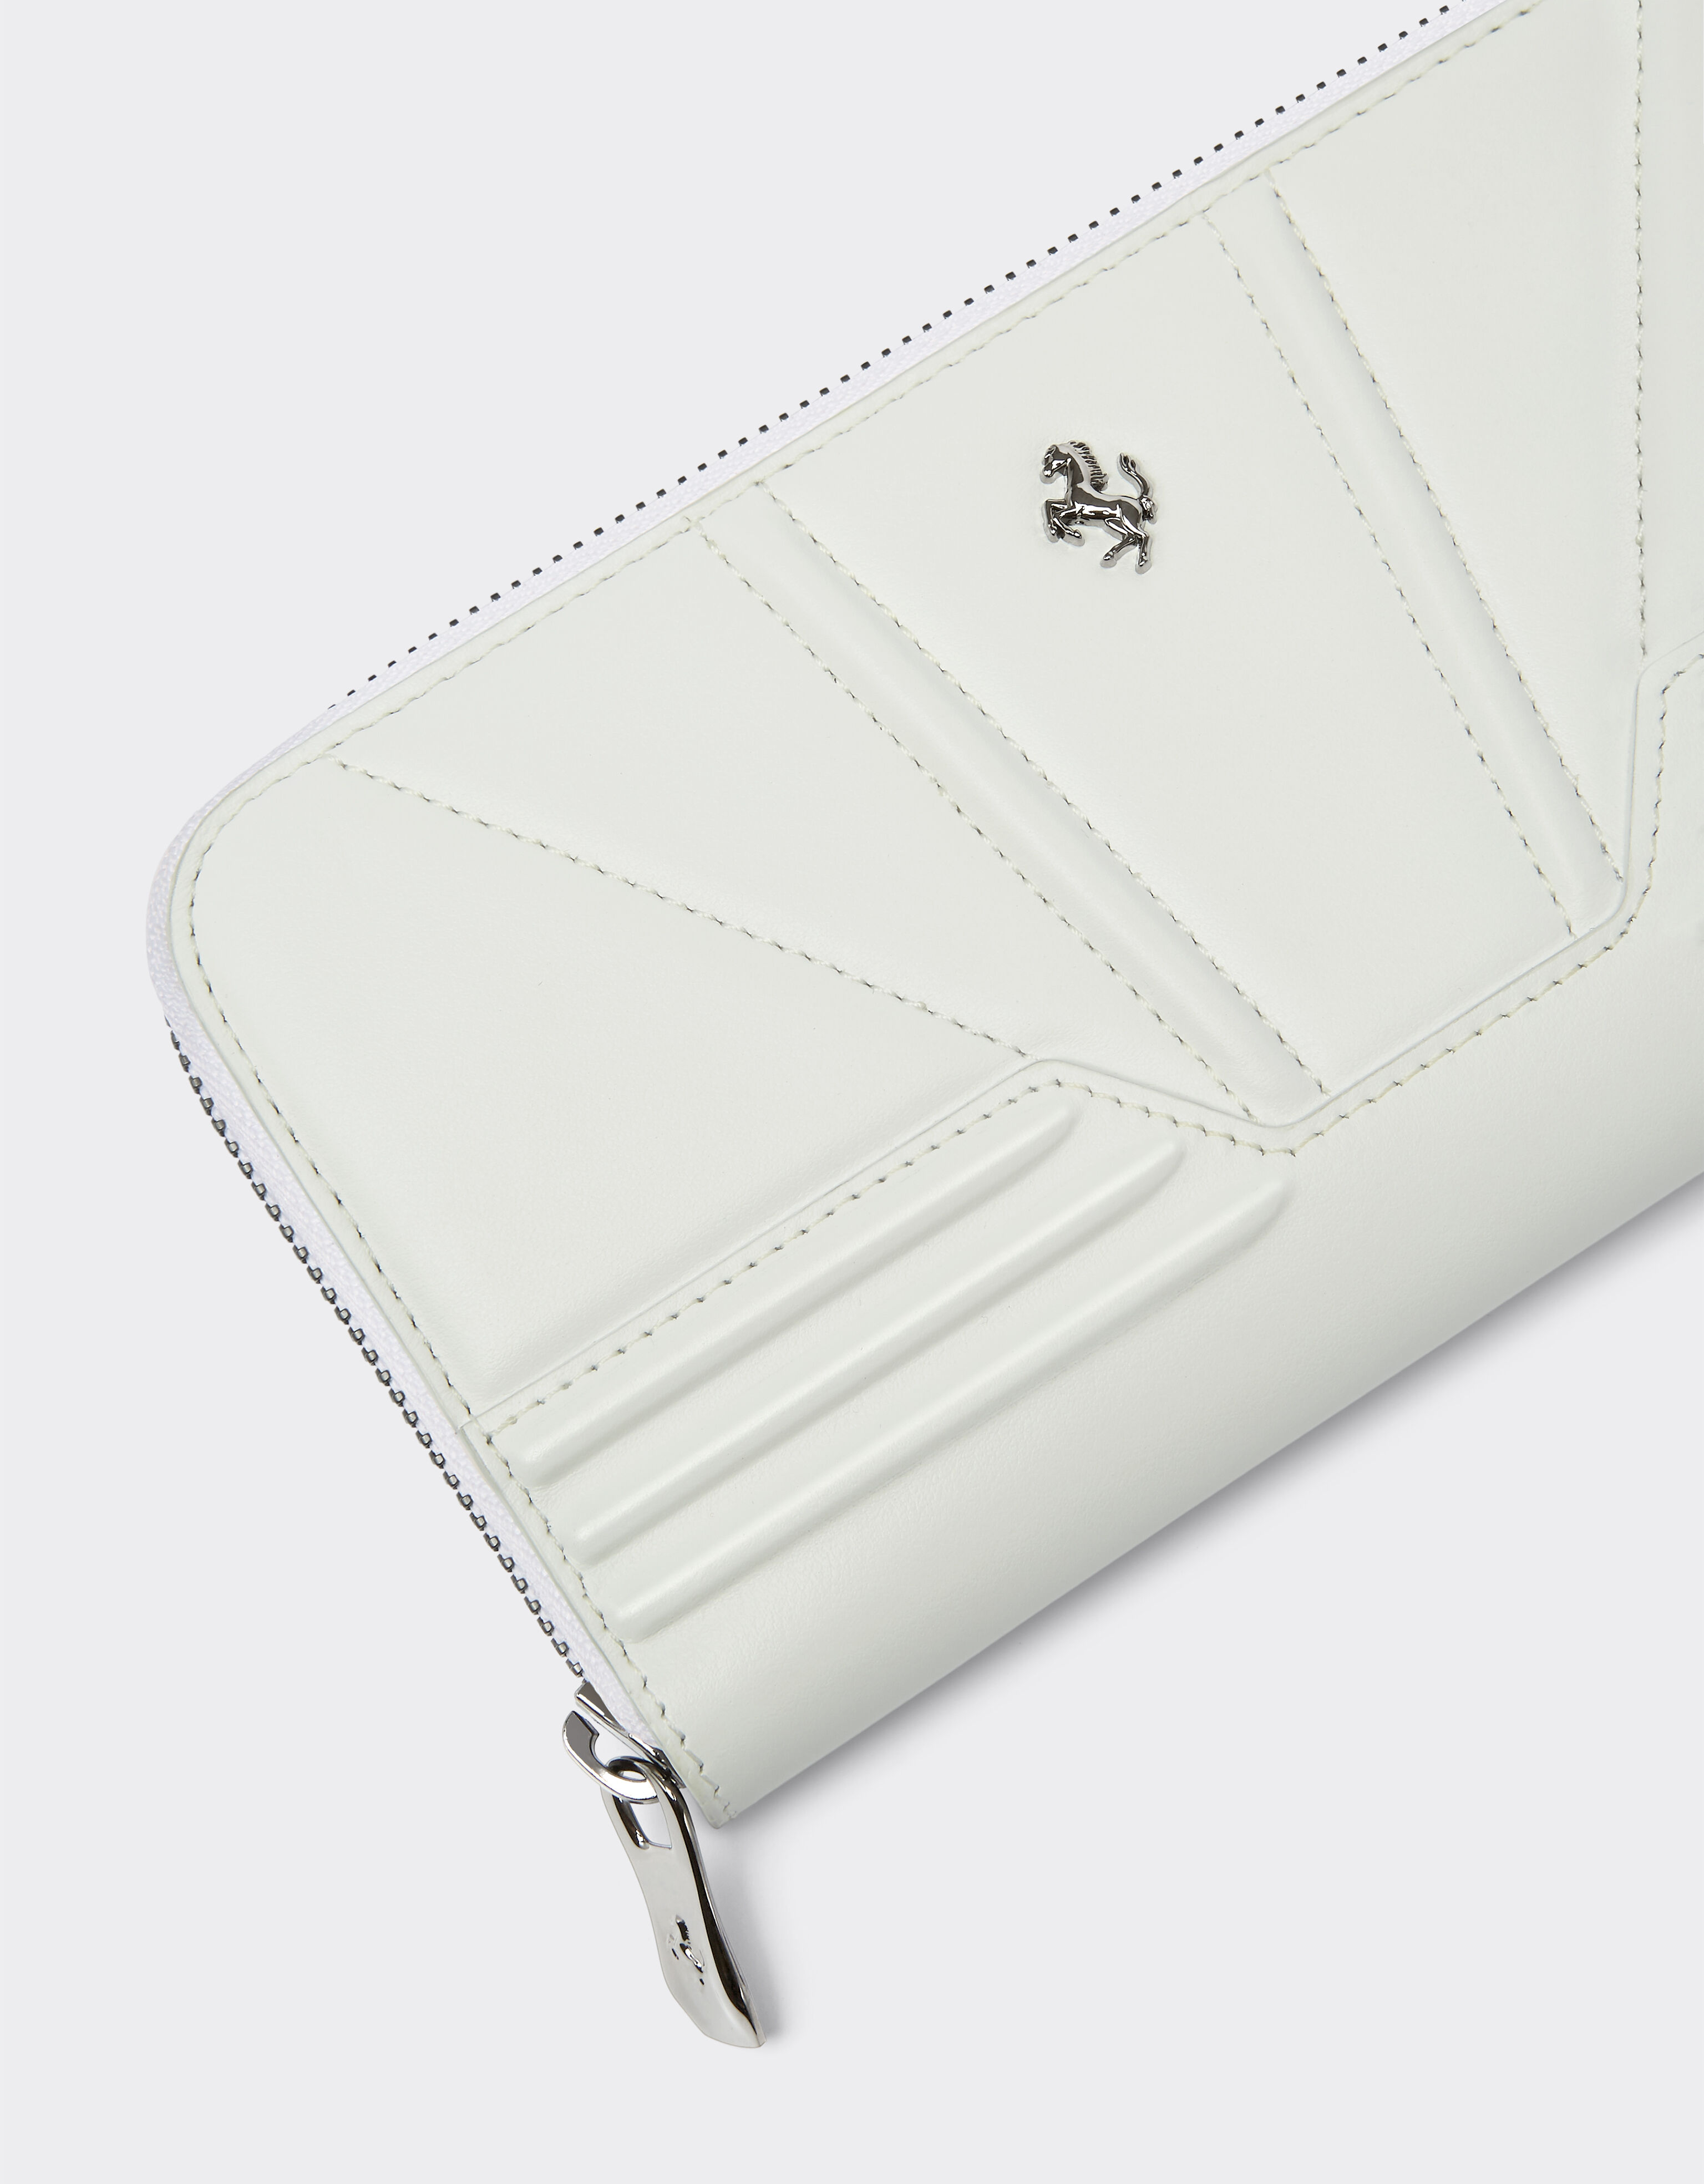 Ferrari Leather wallet with zip Optical White 20250f